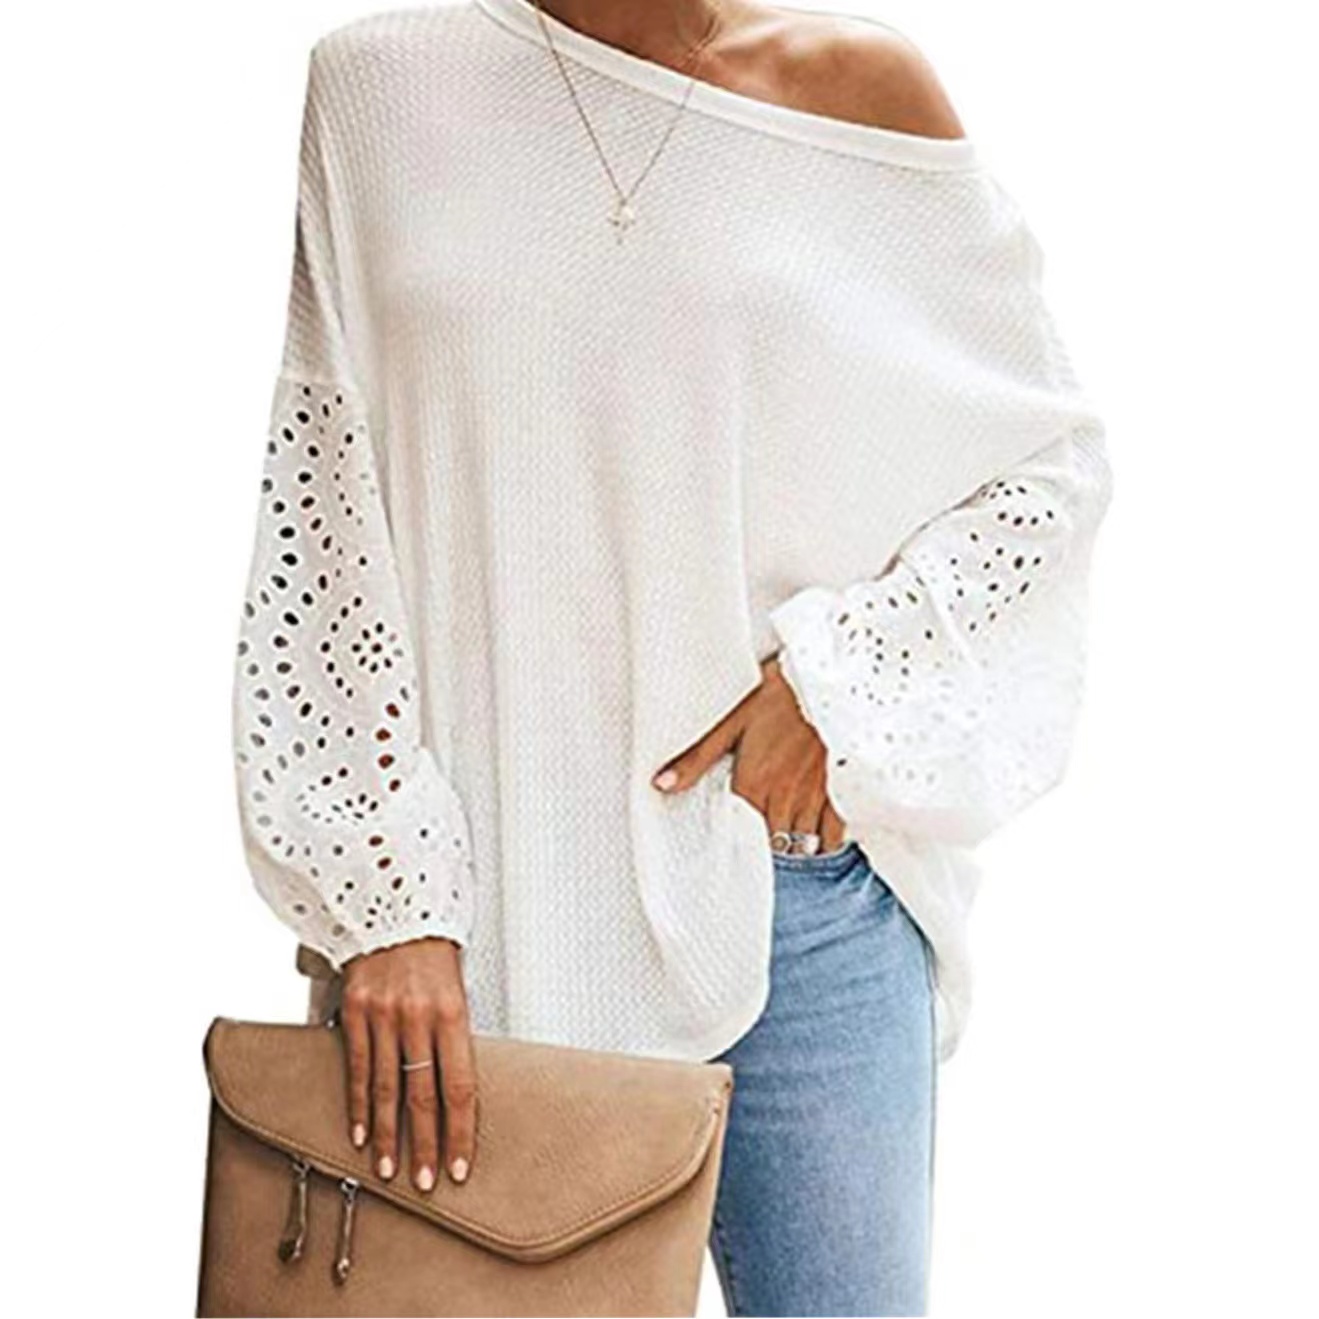 Off The Shoulder Waffle Knit Long Sleeve Pullover Tops Lantern Sleeves Oversized Shirt Blouse For Women